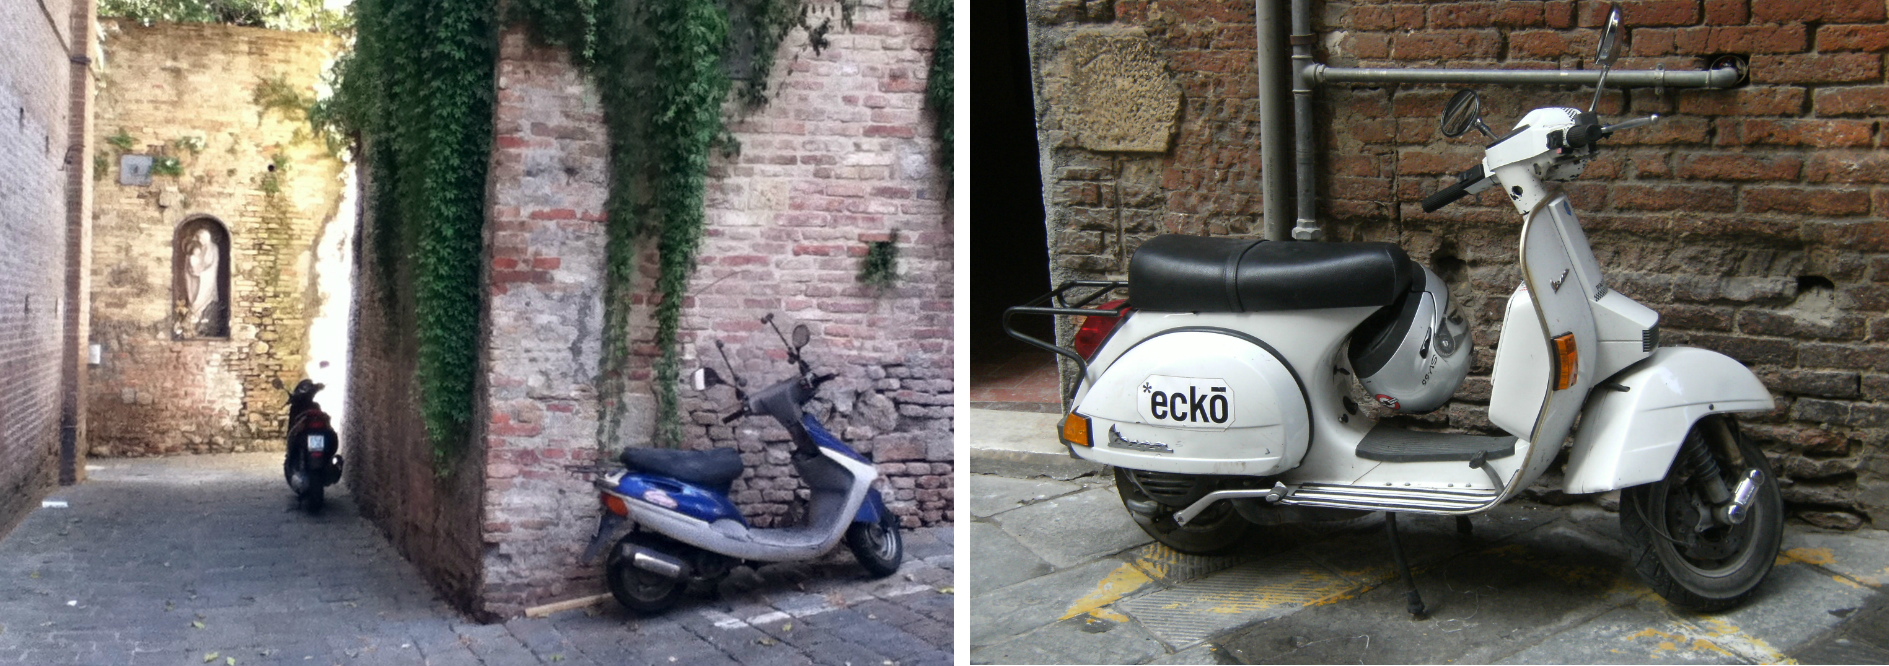 Italy - Siena - Scooters - 1